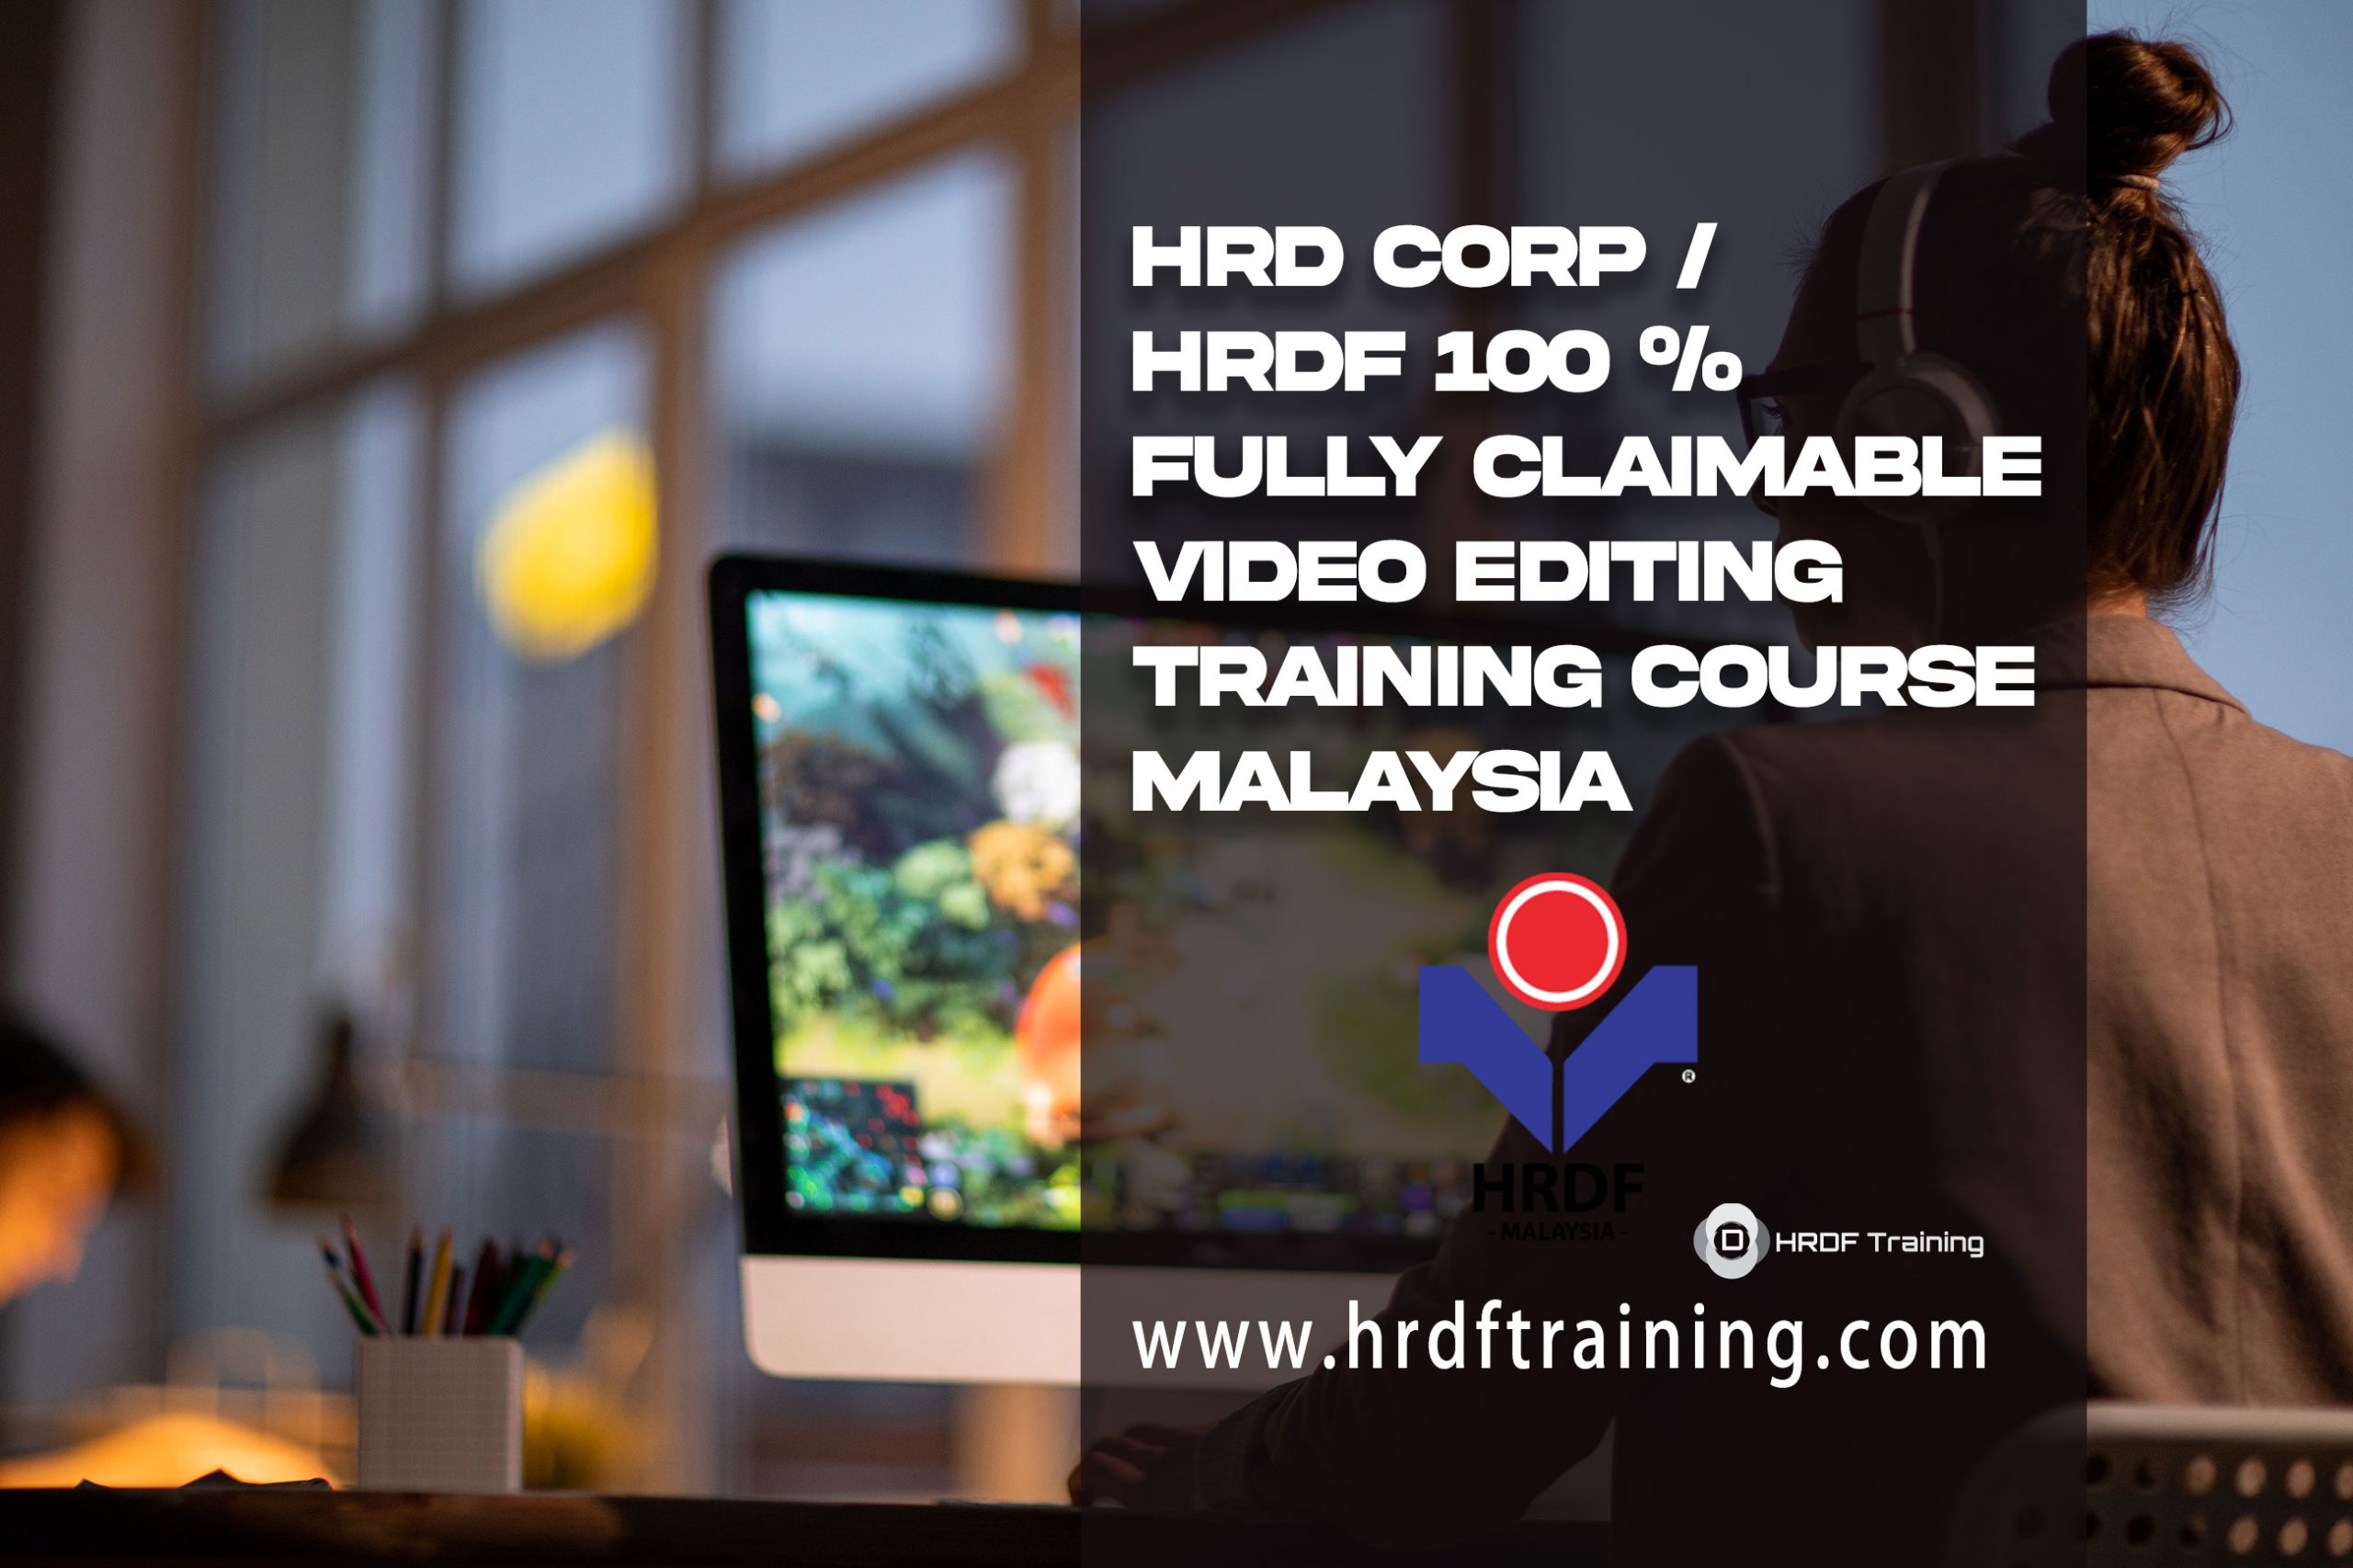 HRDF HRD Corp Claimable Video Editing Training Course Malaysia - August 2022